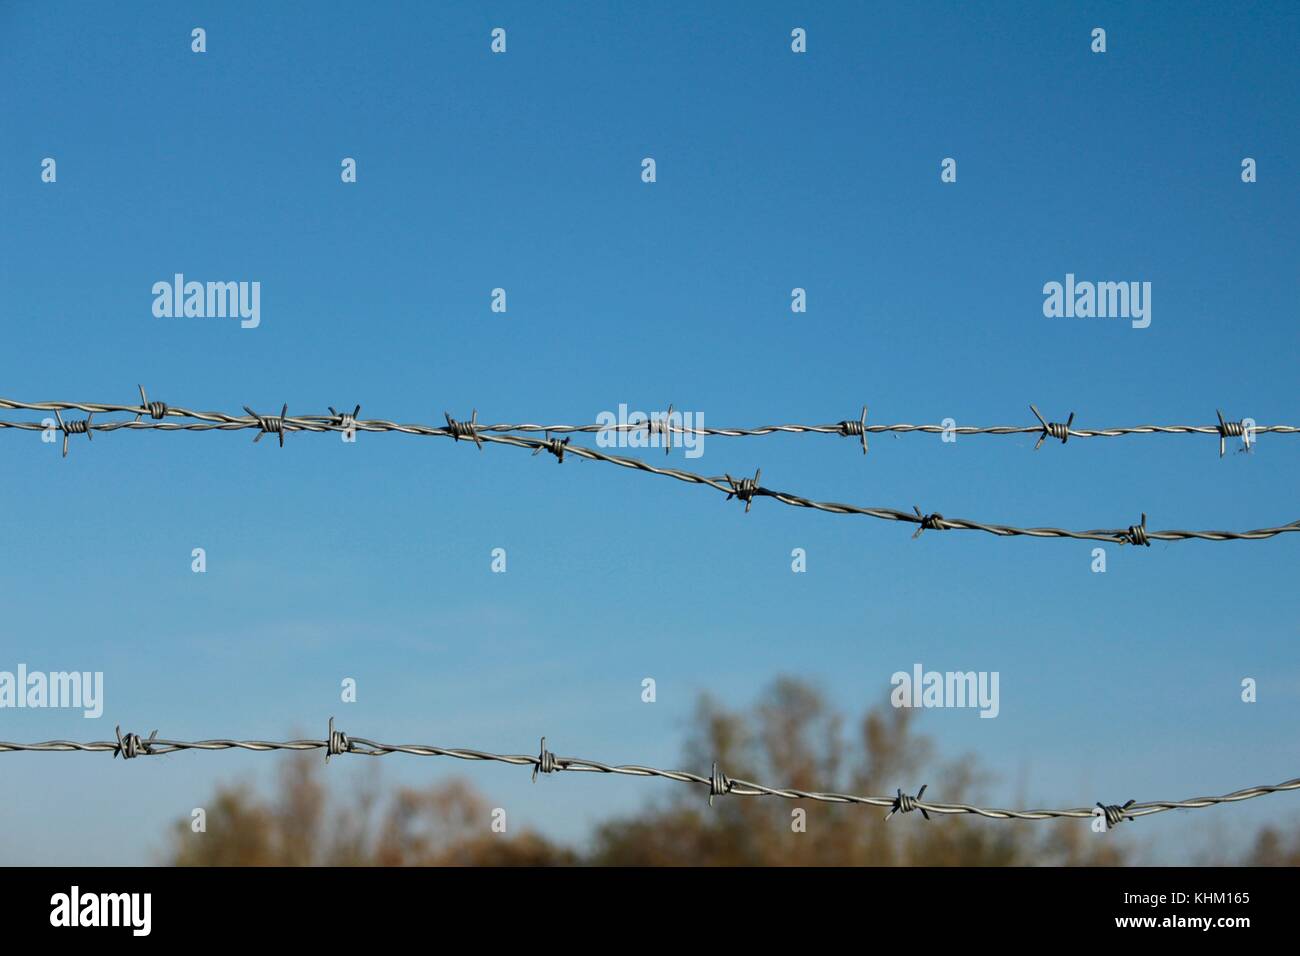 Three strands of barbed wire against blue sky with very top of trees at the bottom Stock Photo